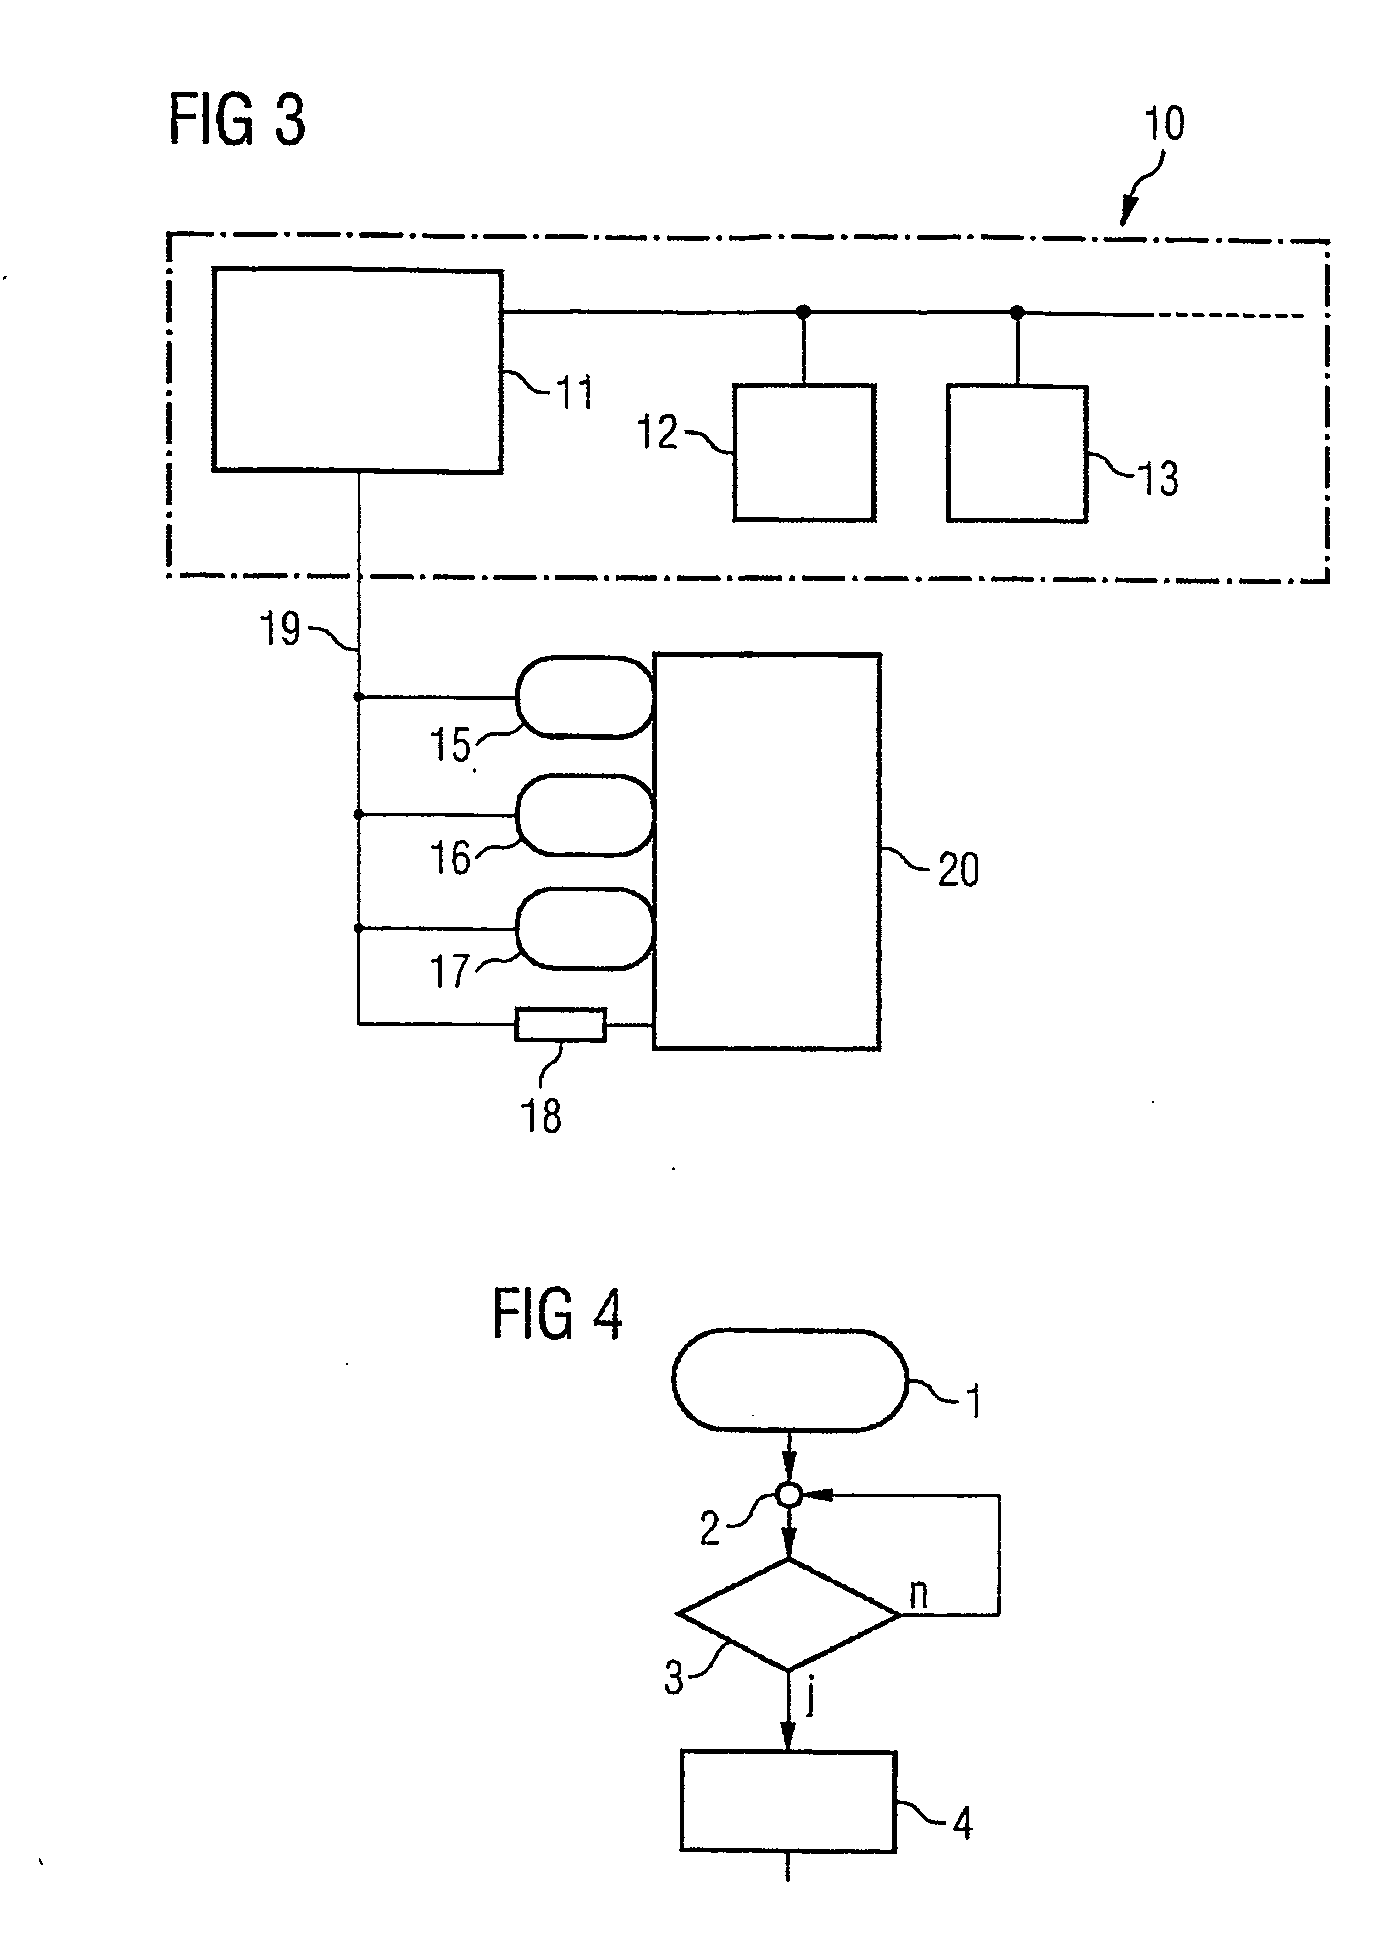 Method and device for controlling the transition between normal operation and overrun fuel cut-off operation of an otto engine operated with direct fuel injection